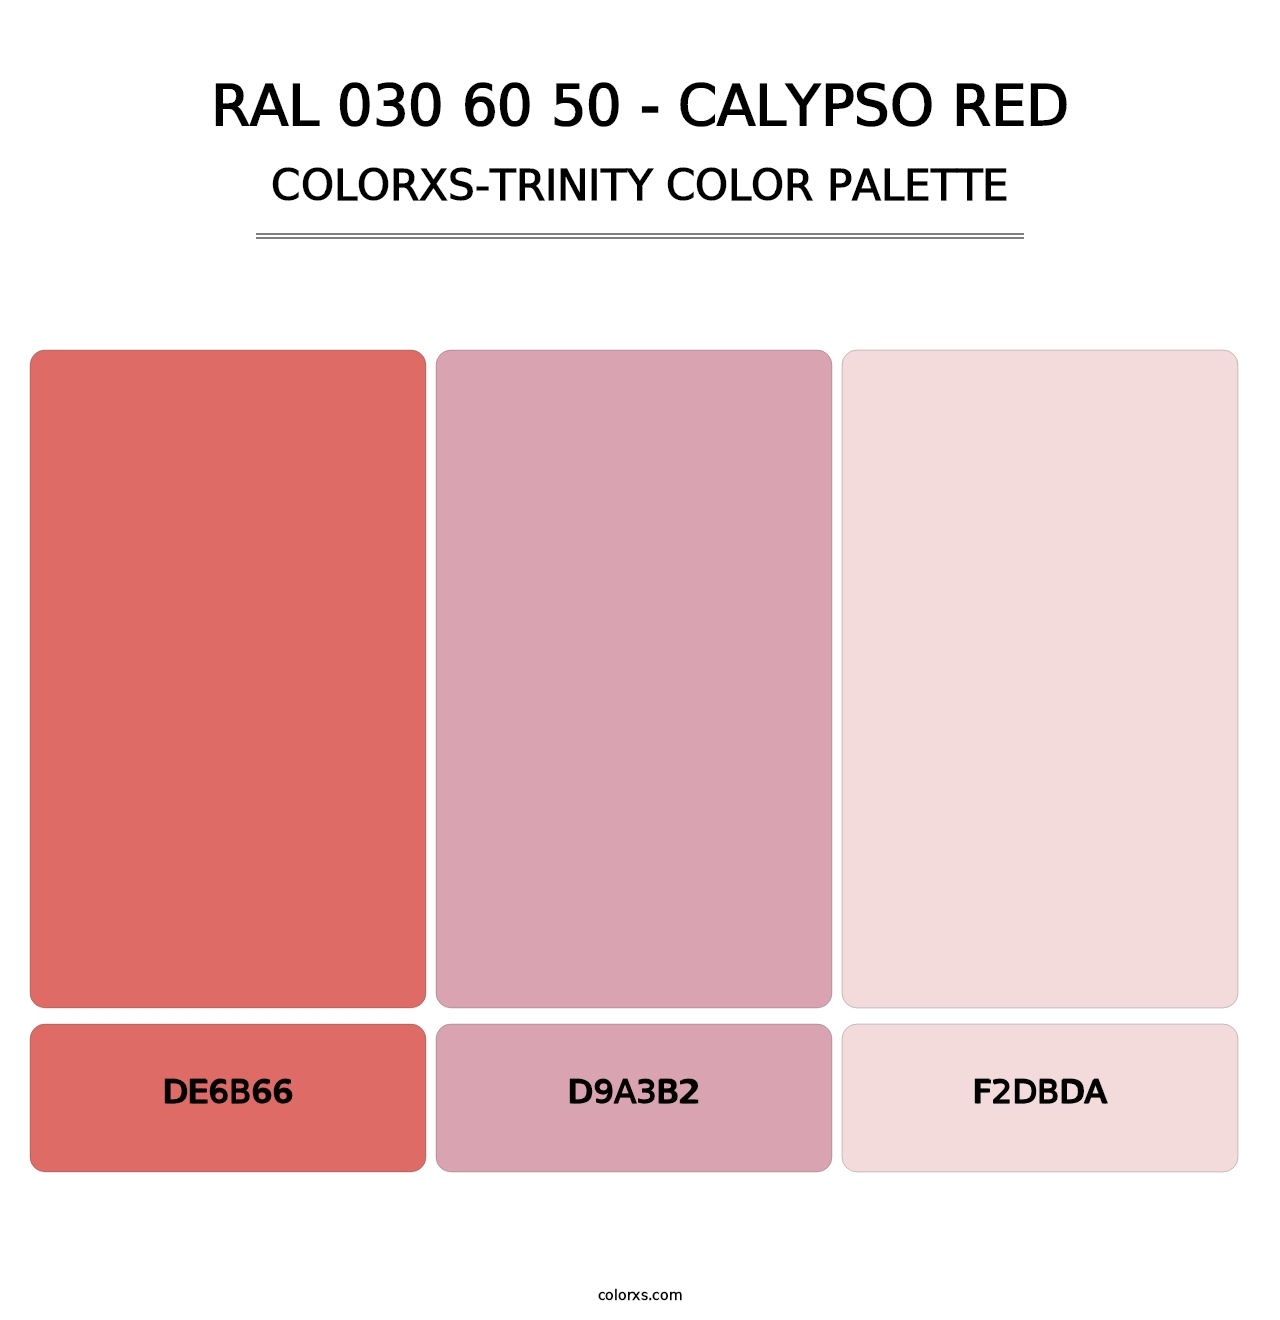 RAL 030 60 50 - Calypso Red - Colorxs Trinity Palette